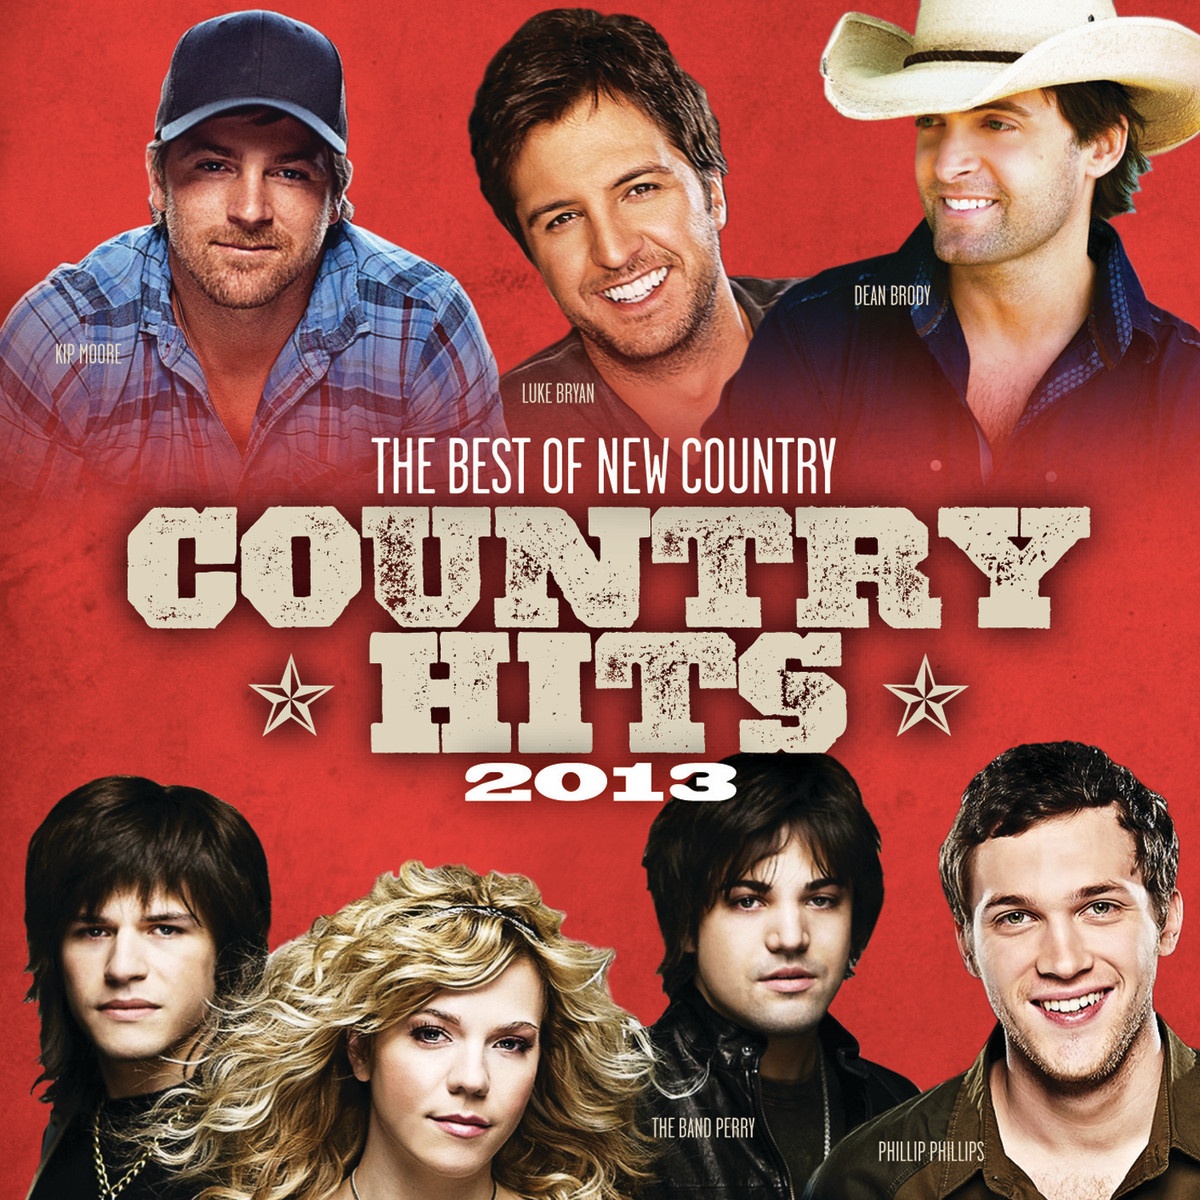 Country Hits 2013